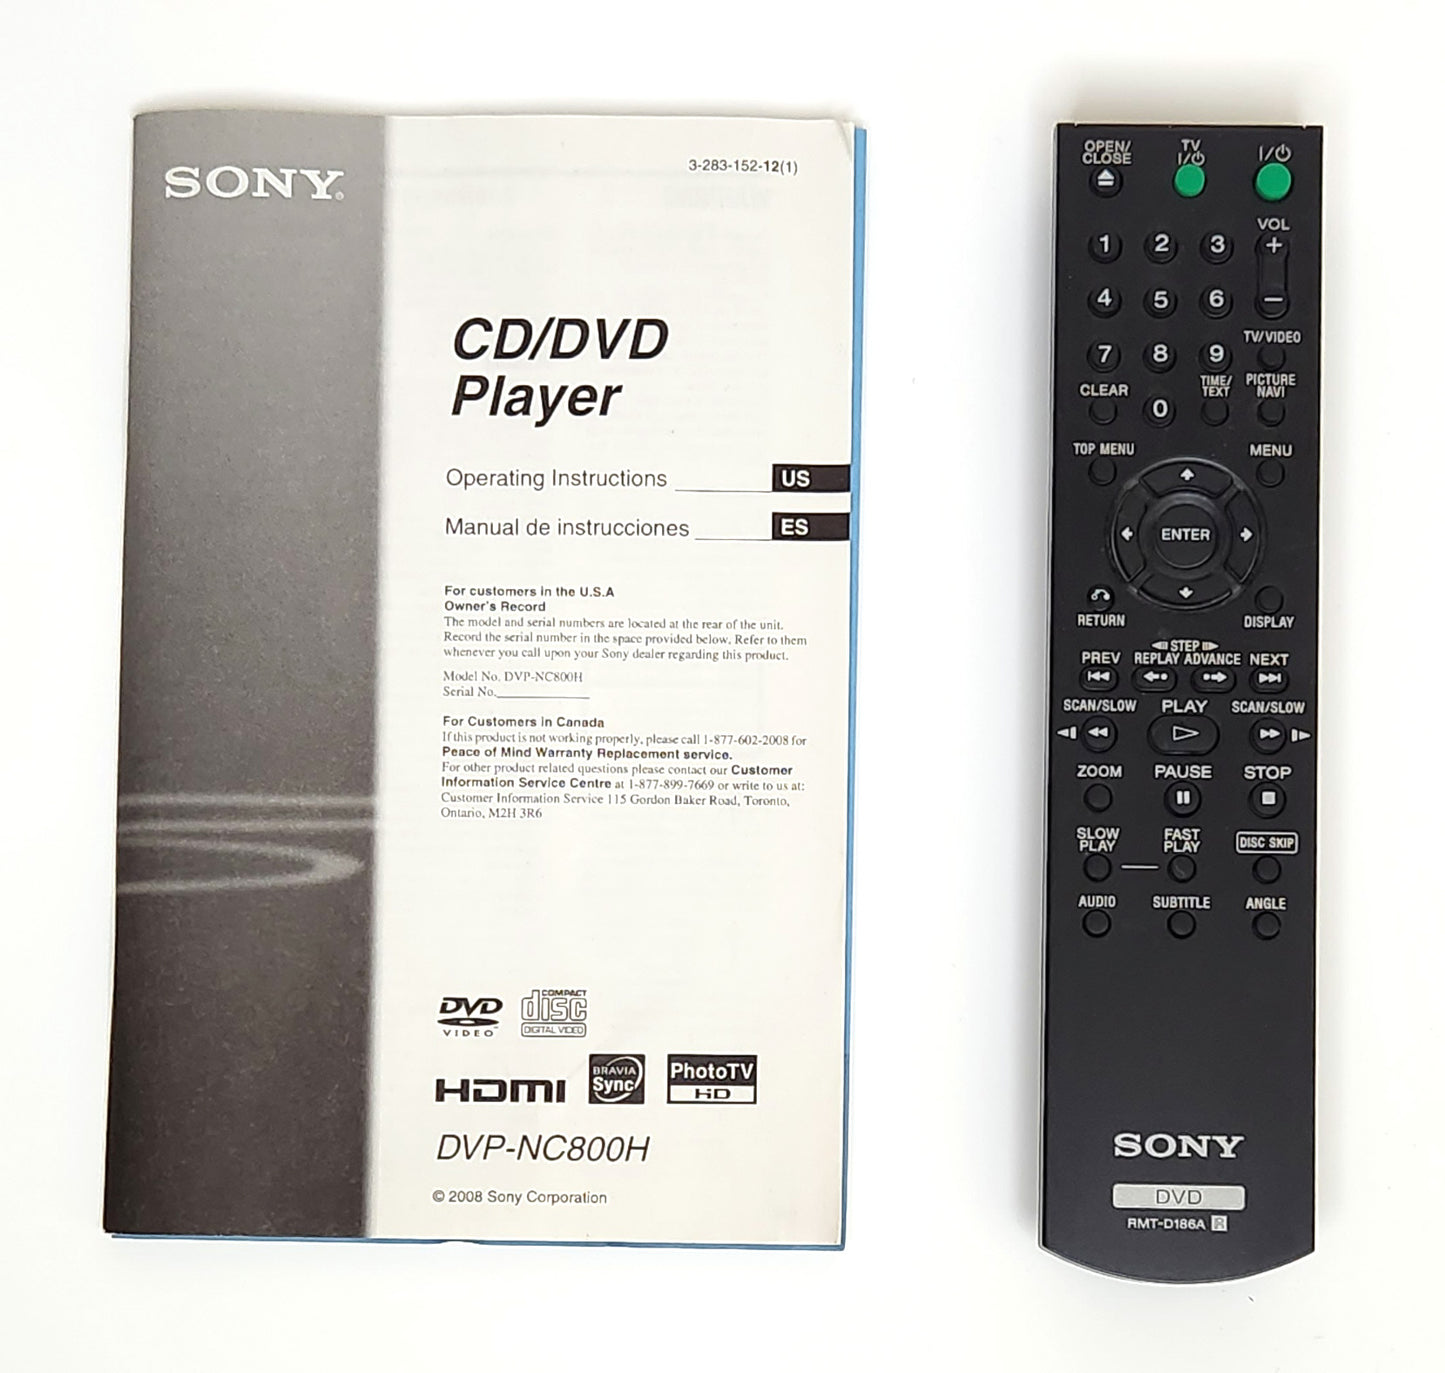 Sony DVP-NC800H DVD/CD Player, 5 Disc Carousel Changer, HDMI - Manual and Remote Control